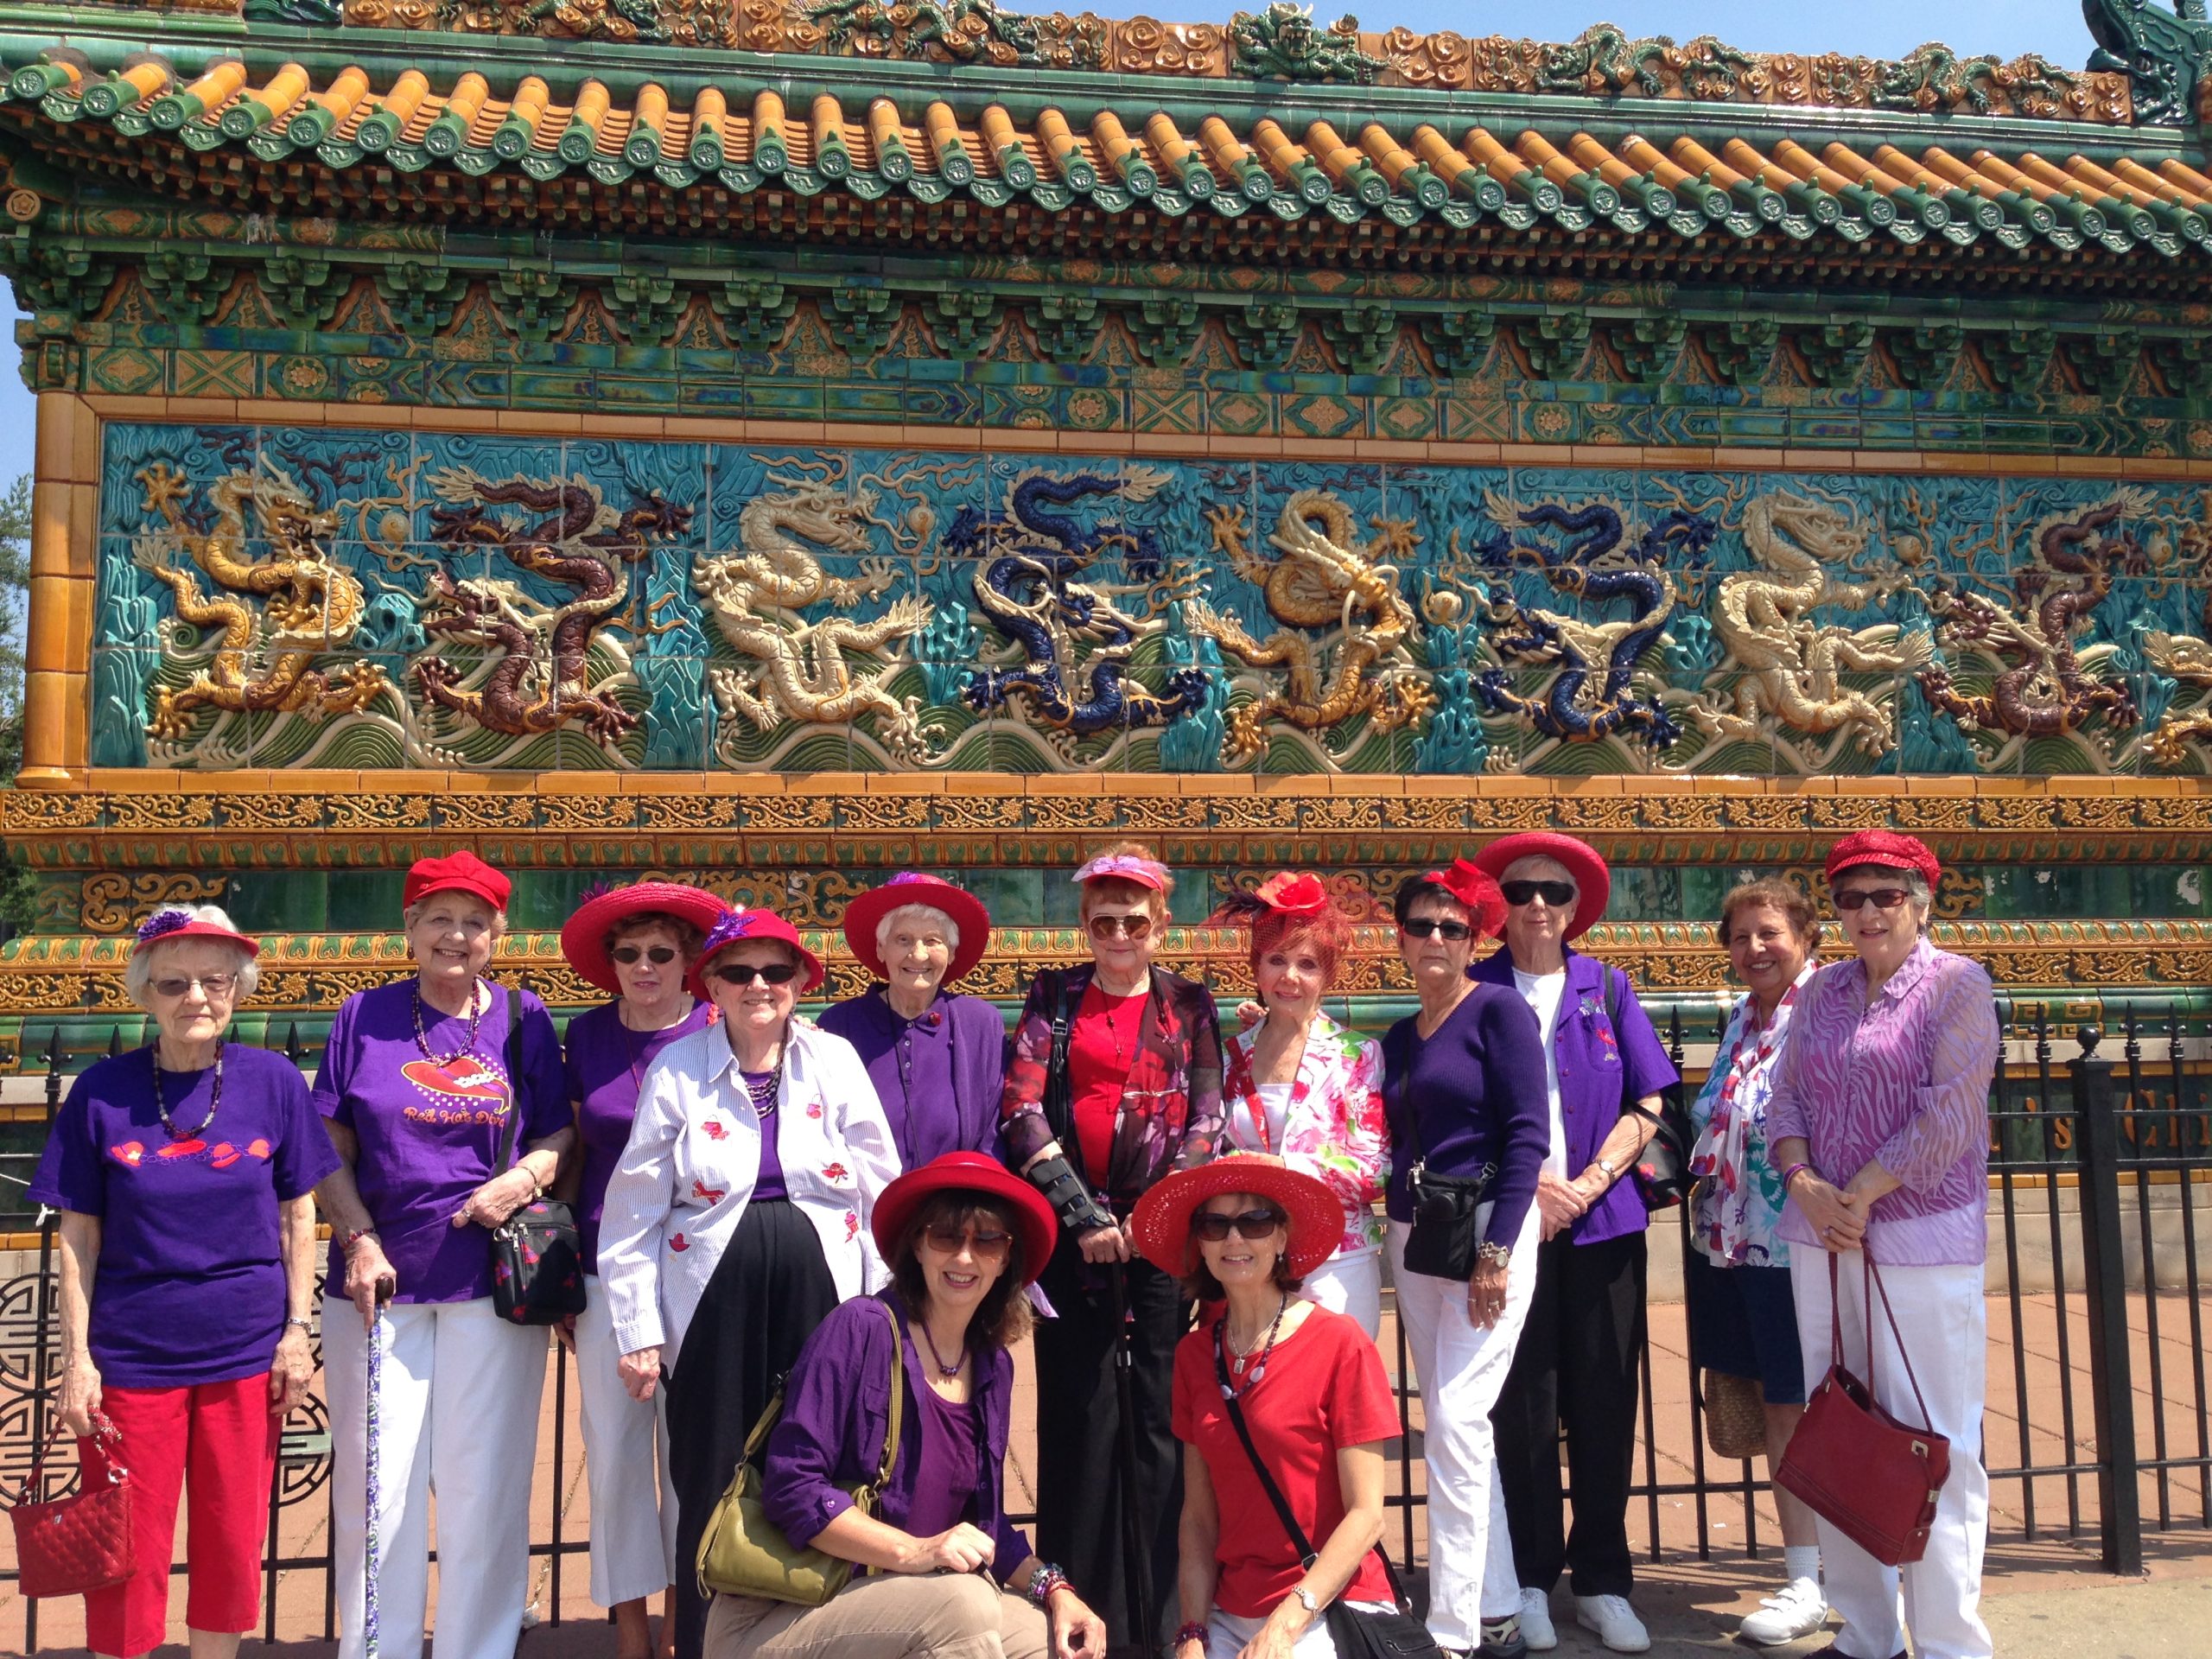 Private group tour through Chinatown